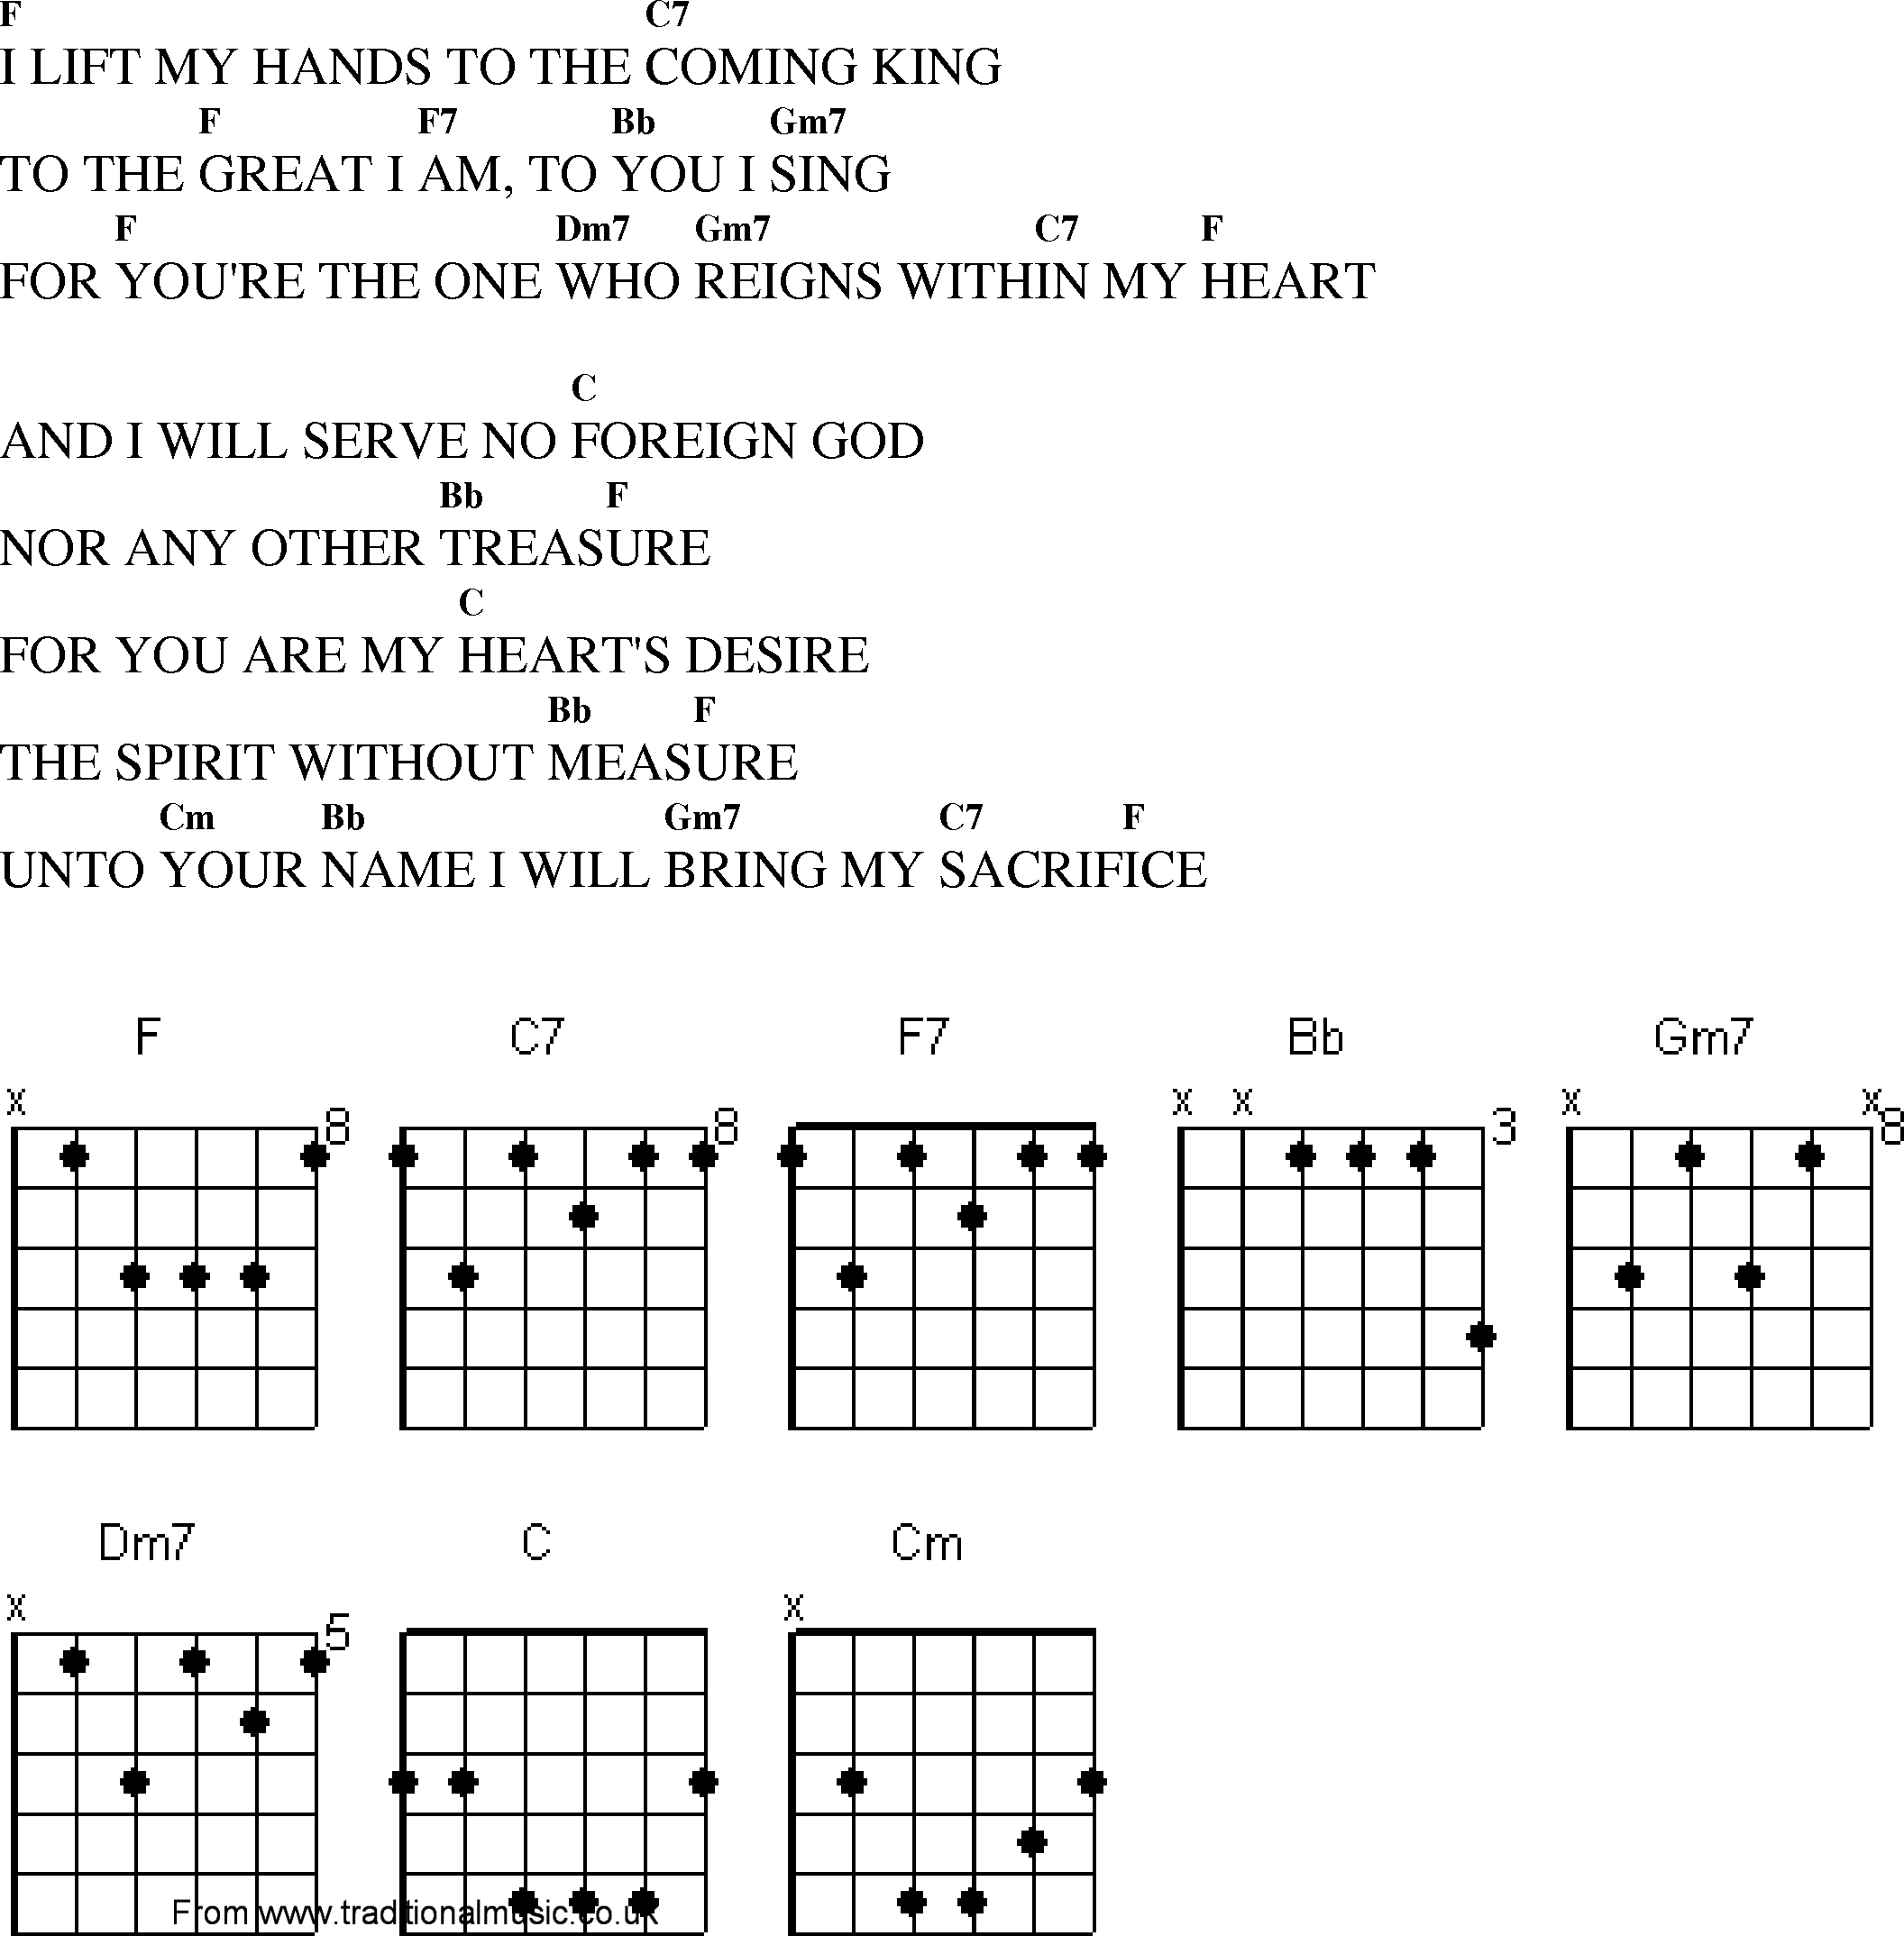 Gospel Song: i_lift_my_hns_to_the_coming_king, lyrics and chords.